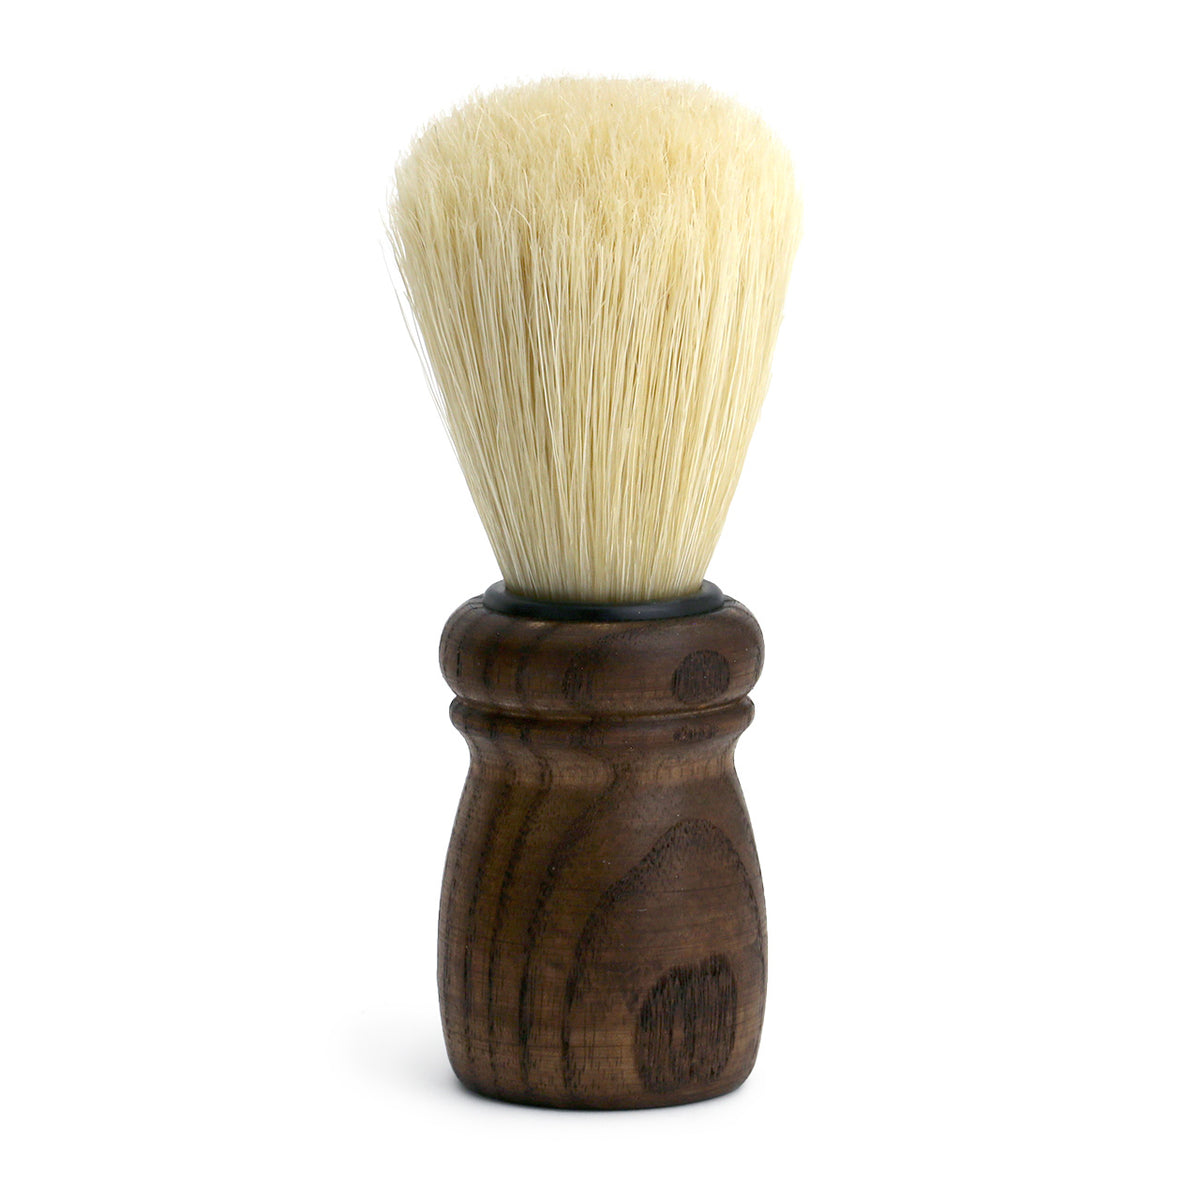 Boar shaving Brush from Redecker, Germany. Made from dark brown Acacia Wood